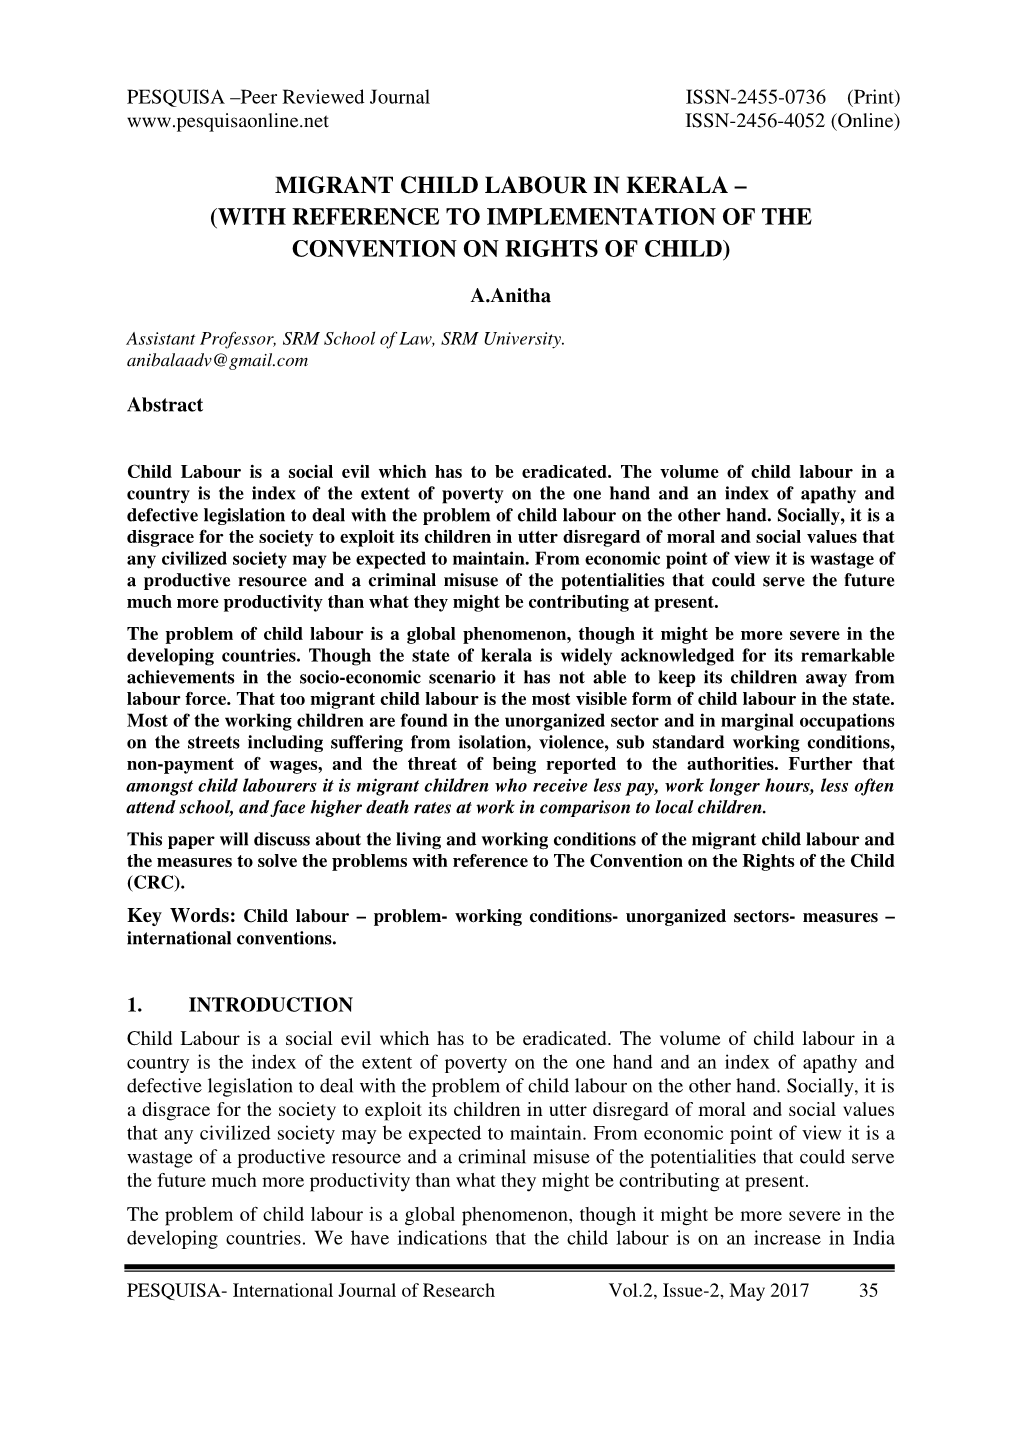 Migrant Child Labour in Kerala – (With Reference to Implementation of the Convention on Rights of Child)